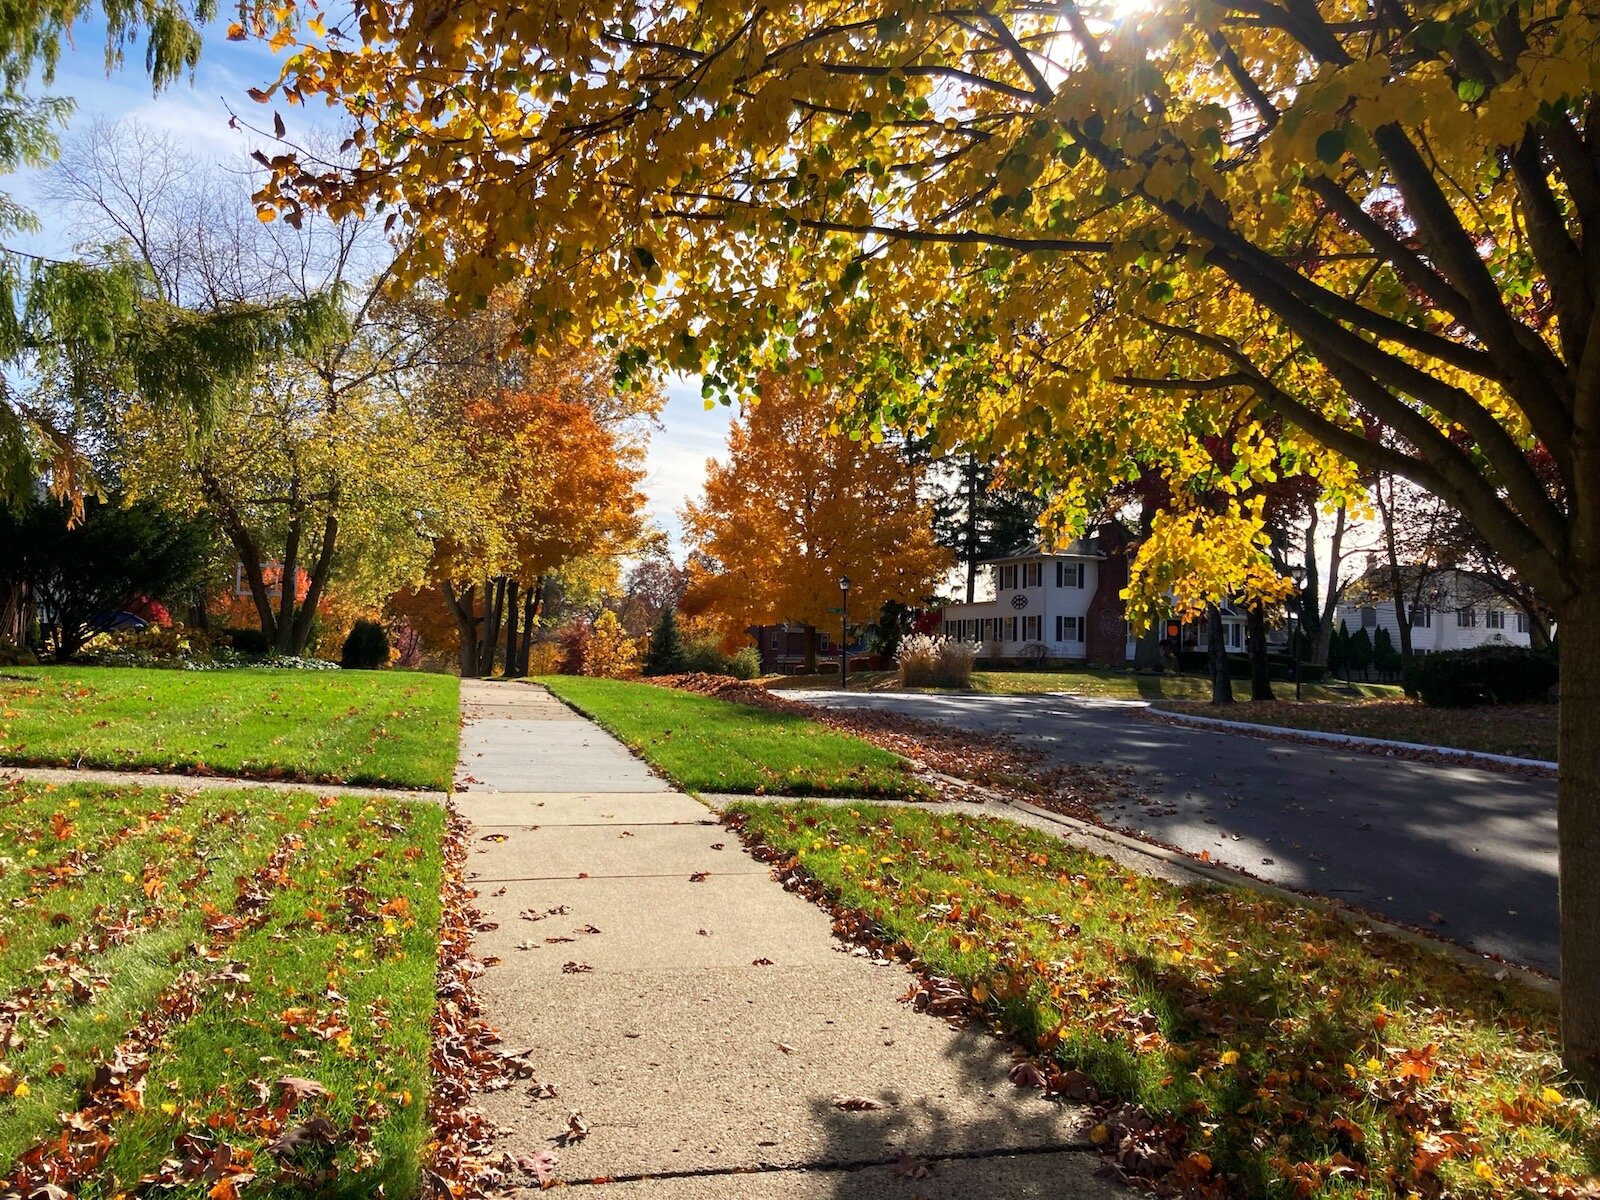 If you drive the winding streets of Historic Southwood Park in the fall, you’ll be swept away into an Autumn wonderland.